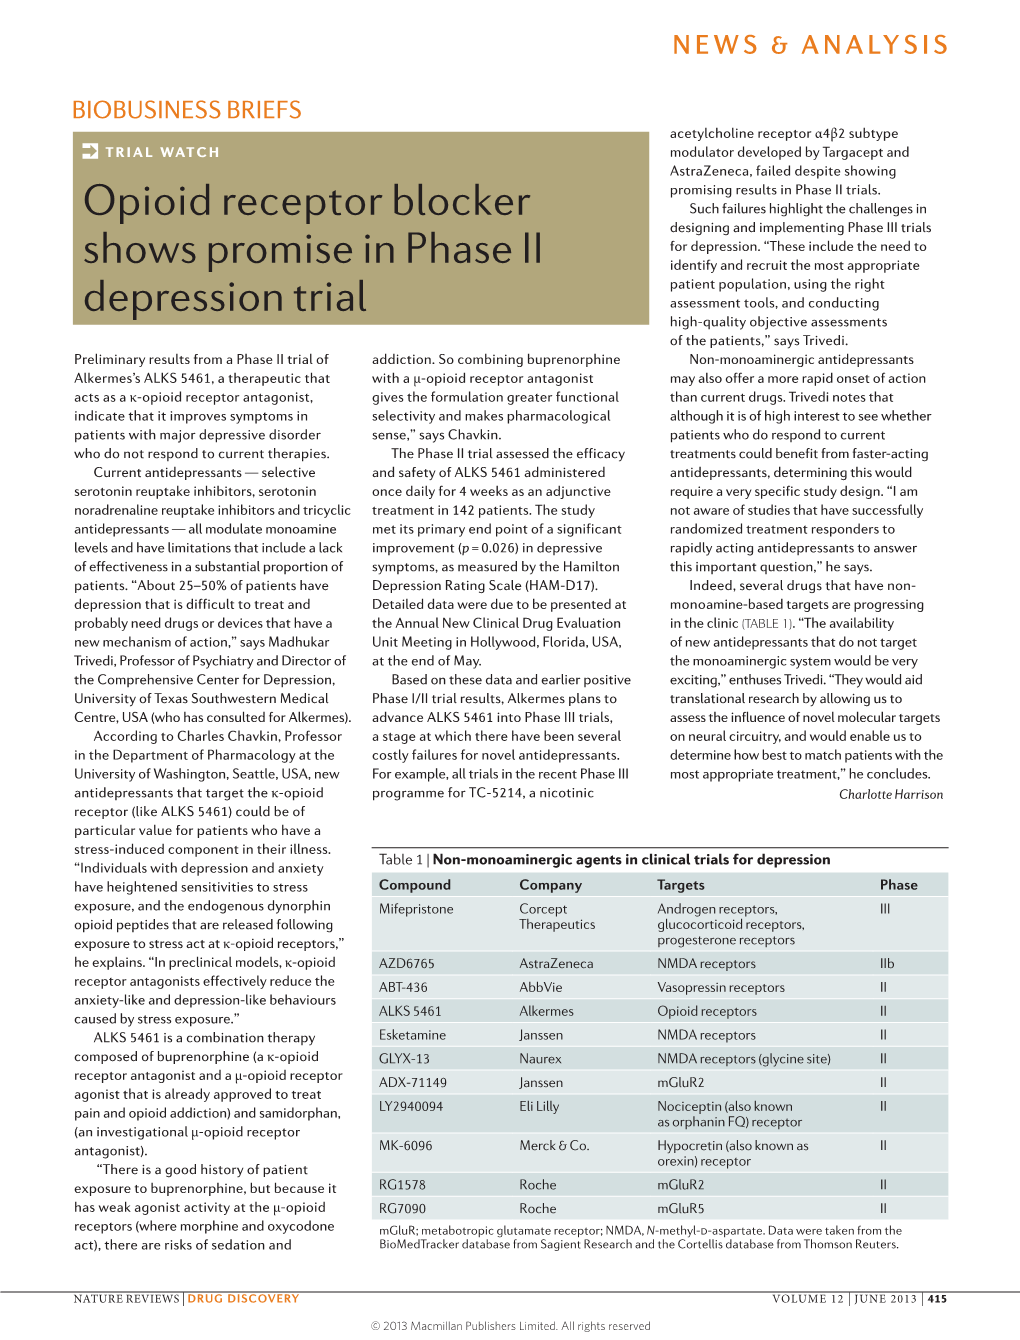 Opioid Receptor Blocker Shows Promise in Phase II Depression Trial